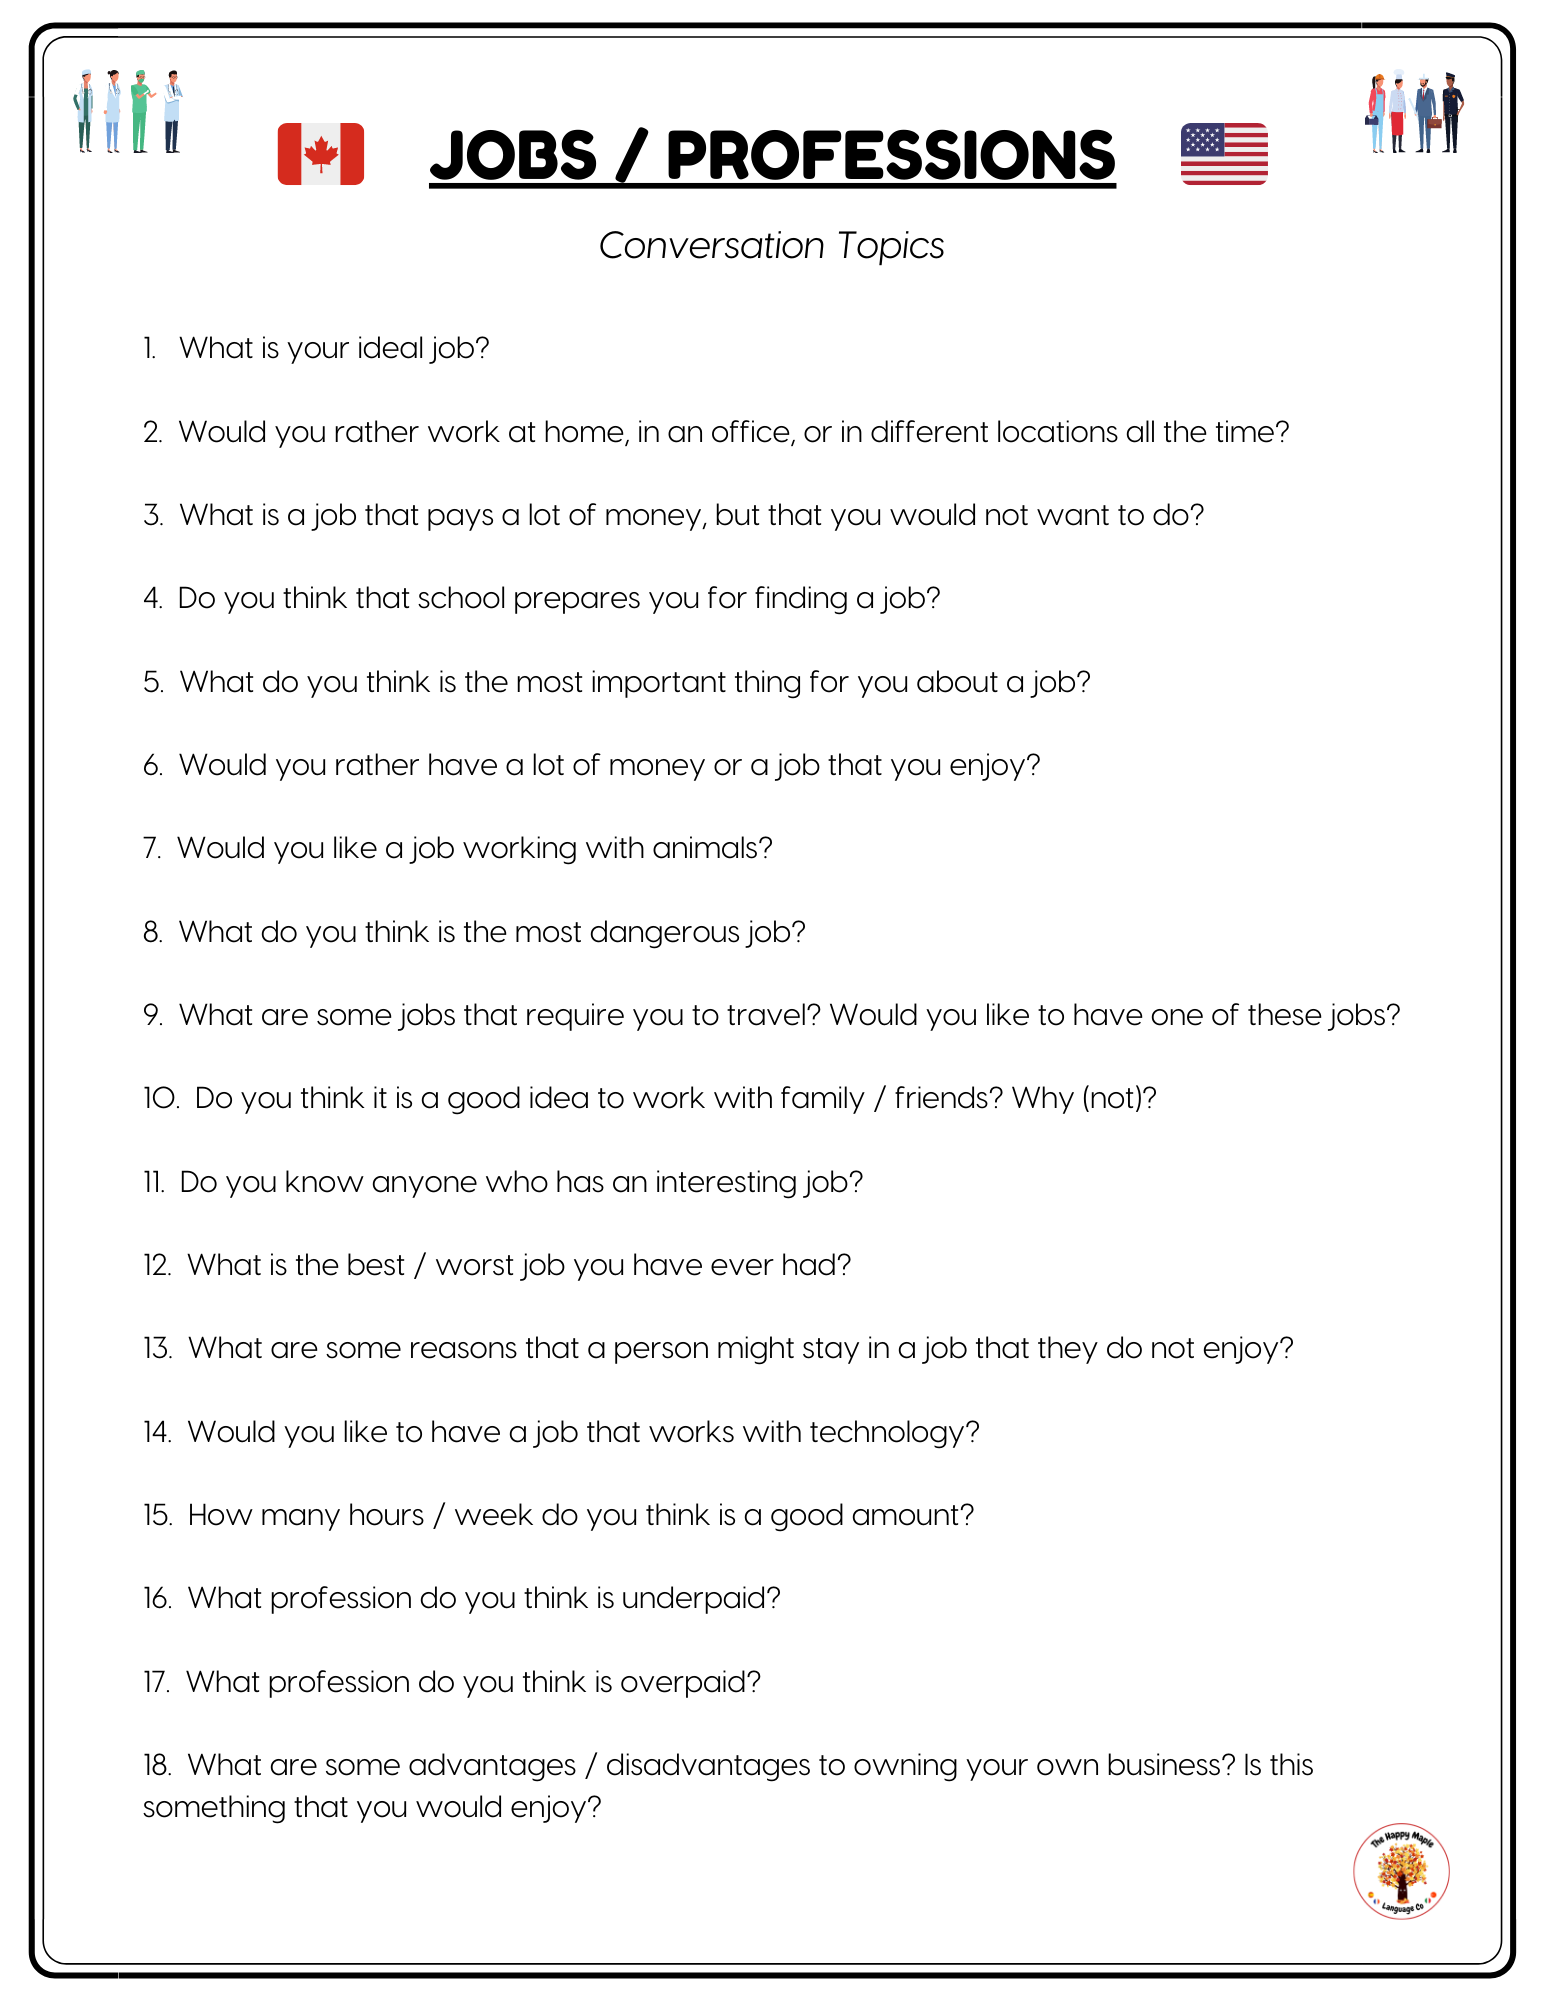 ESL Jobs and Professions Conversation Questions for Language Classrooms